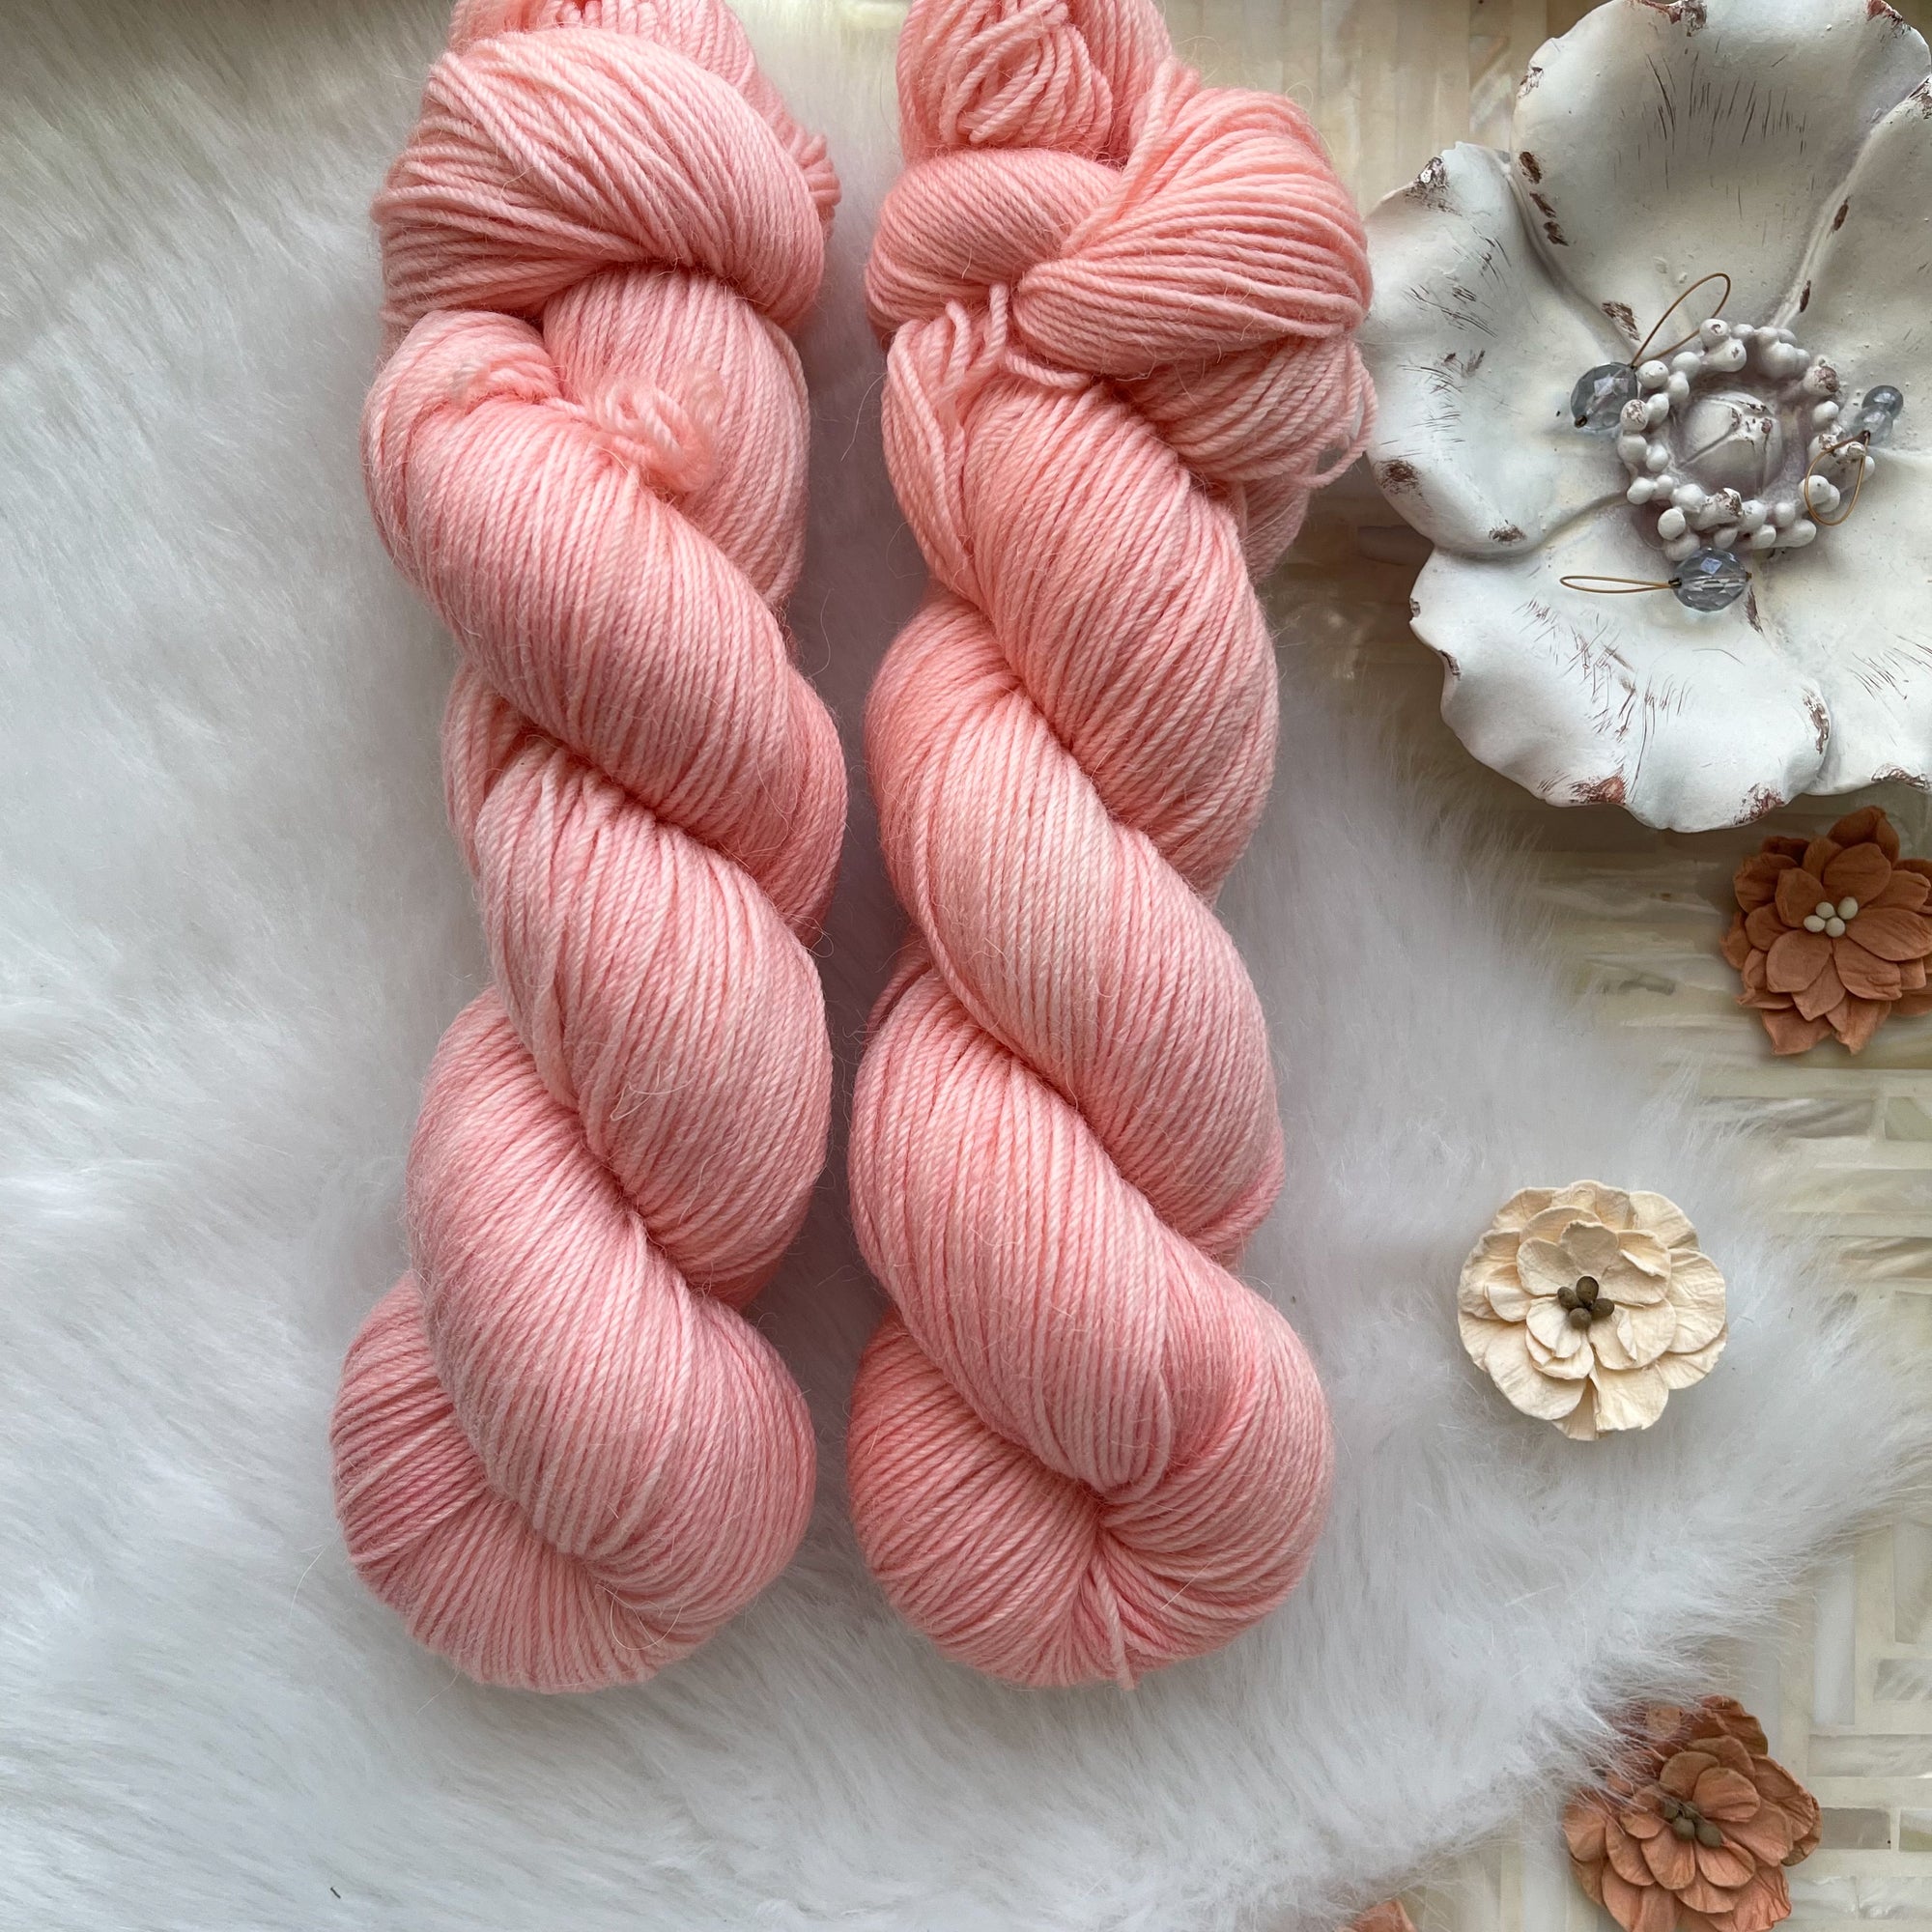 PEARL PINK -Dyed to Order - Dreamy Base Handdyed Yarn - Tippy Tree